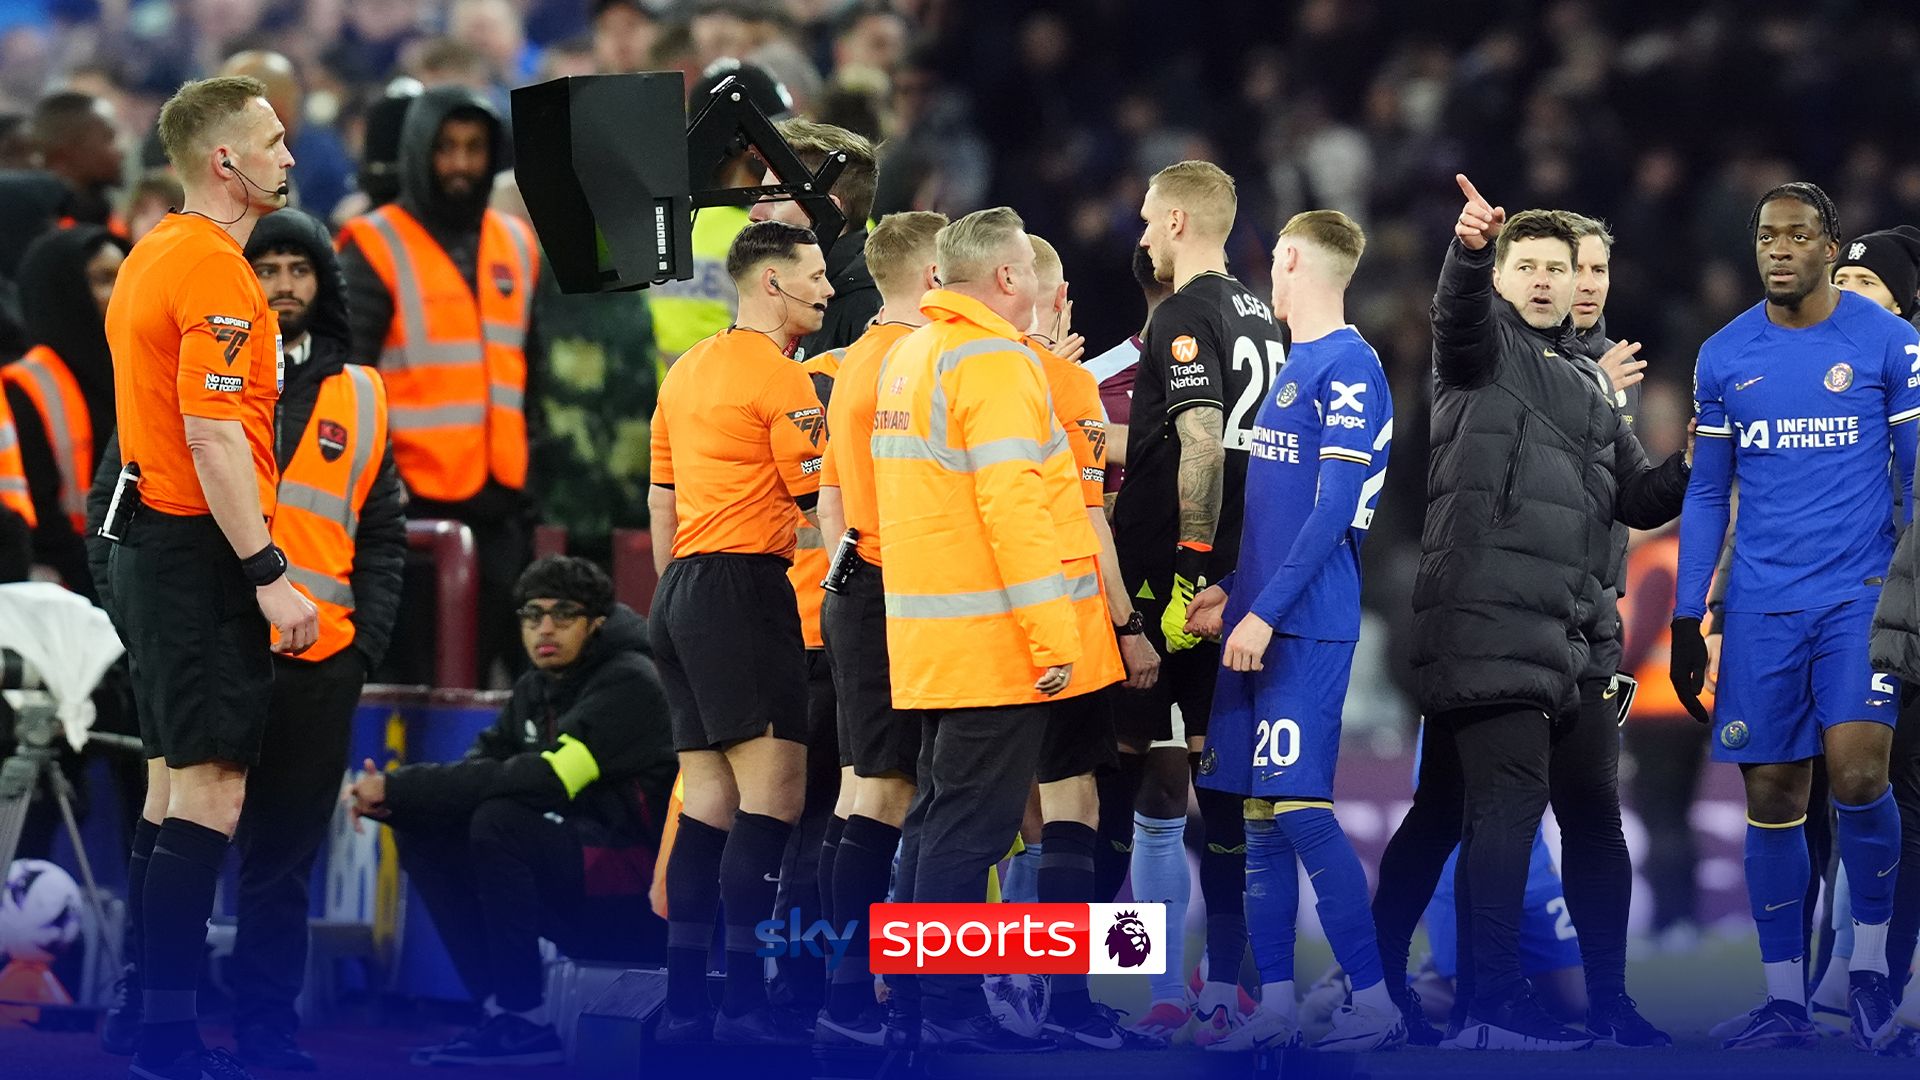 var-controversy!-chelsea-swarm-referee-after-disasi-disallowed-goal!